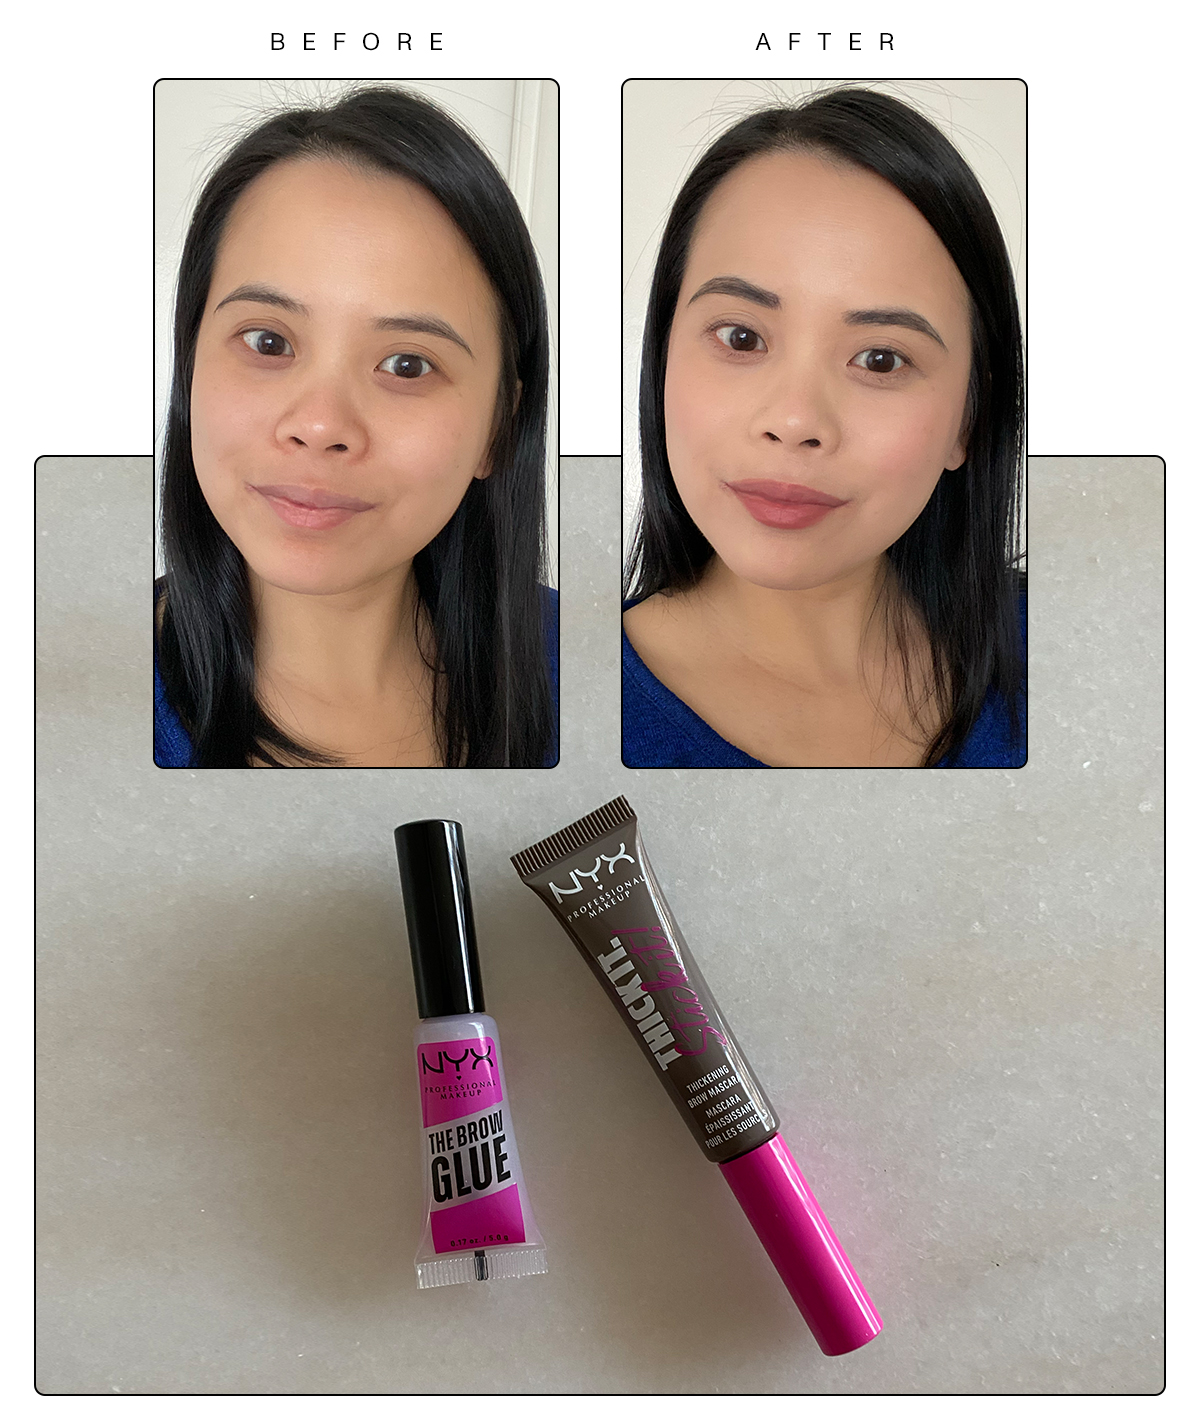 nyx professional makeup brow glue try on: before and after